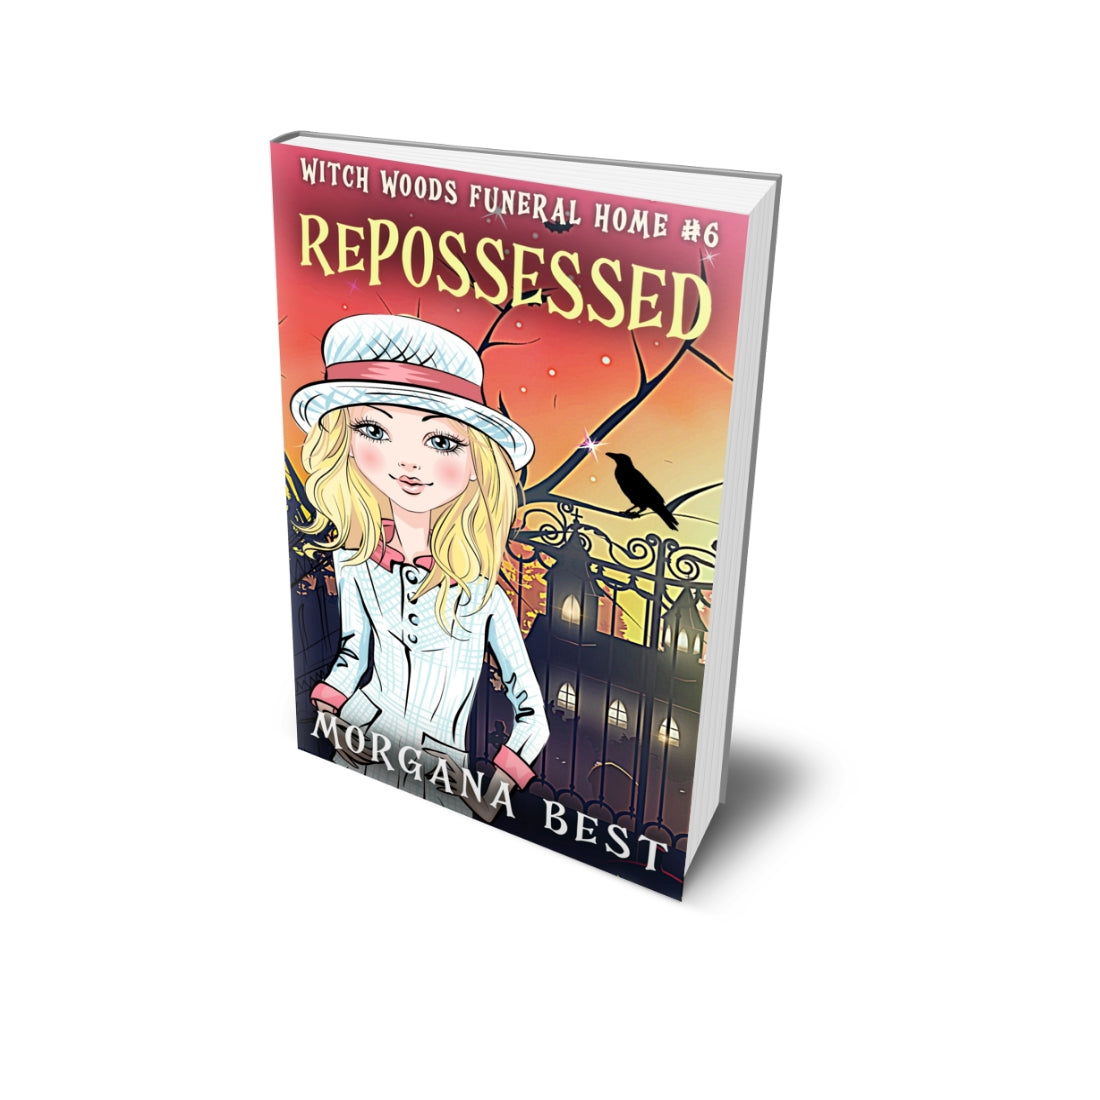 repossessed paranormal cozy mystery morgana best paperback book